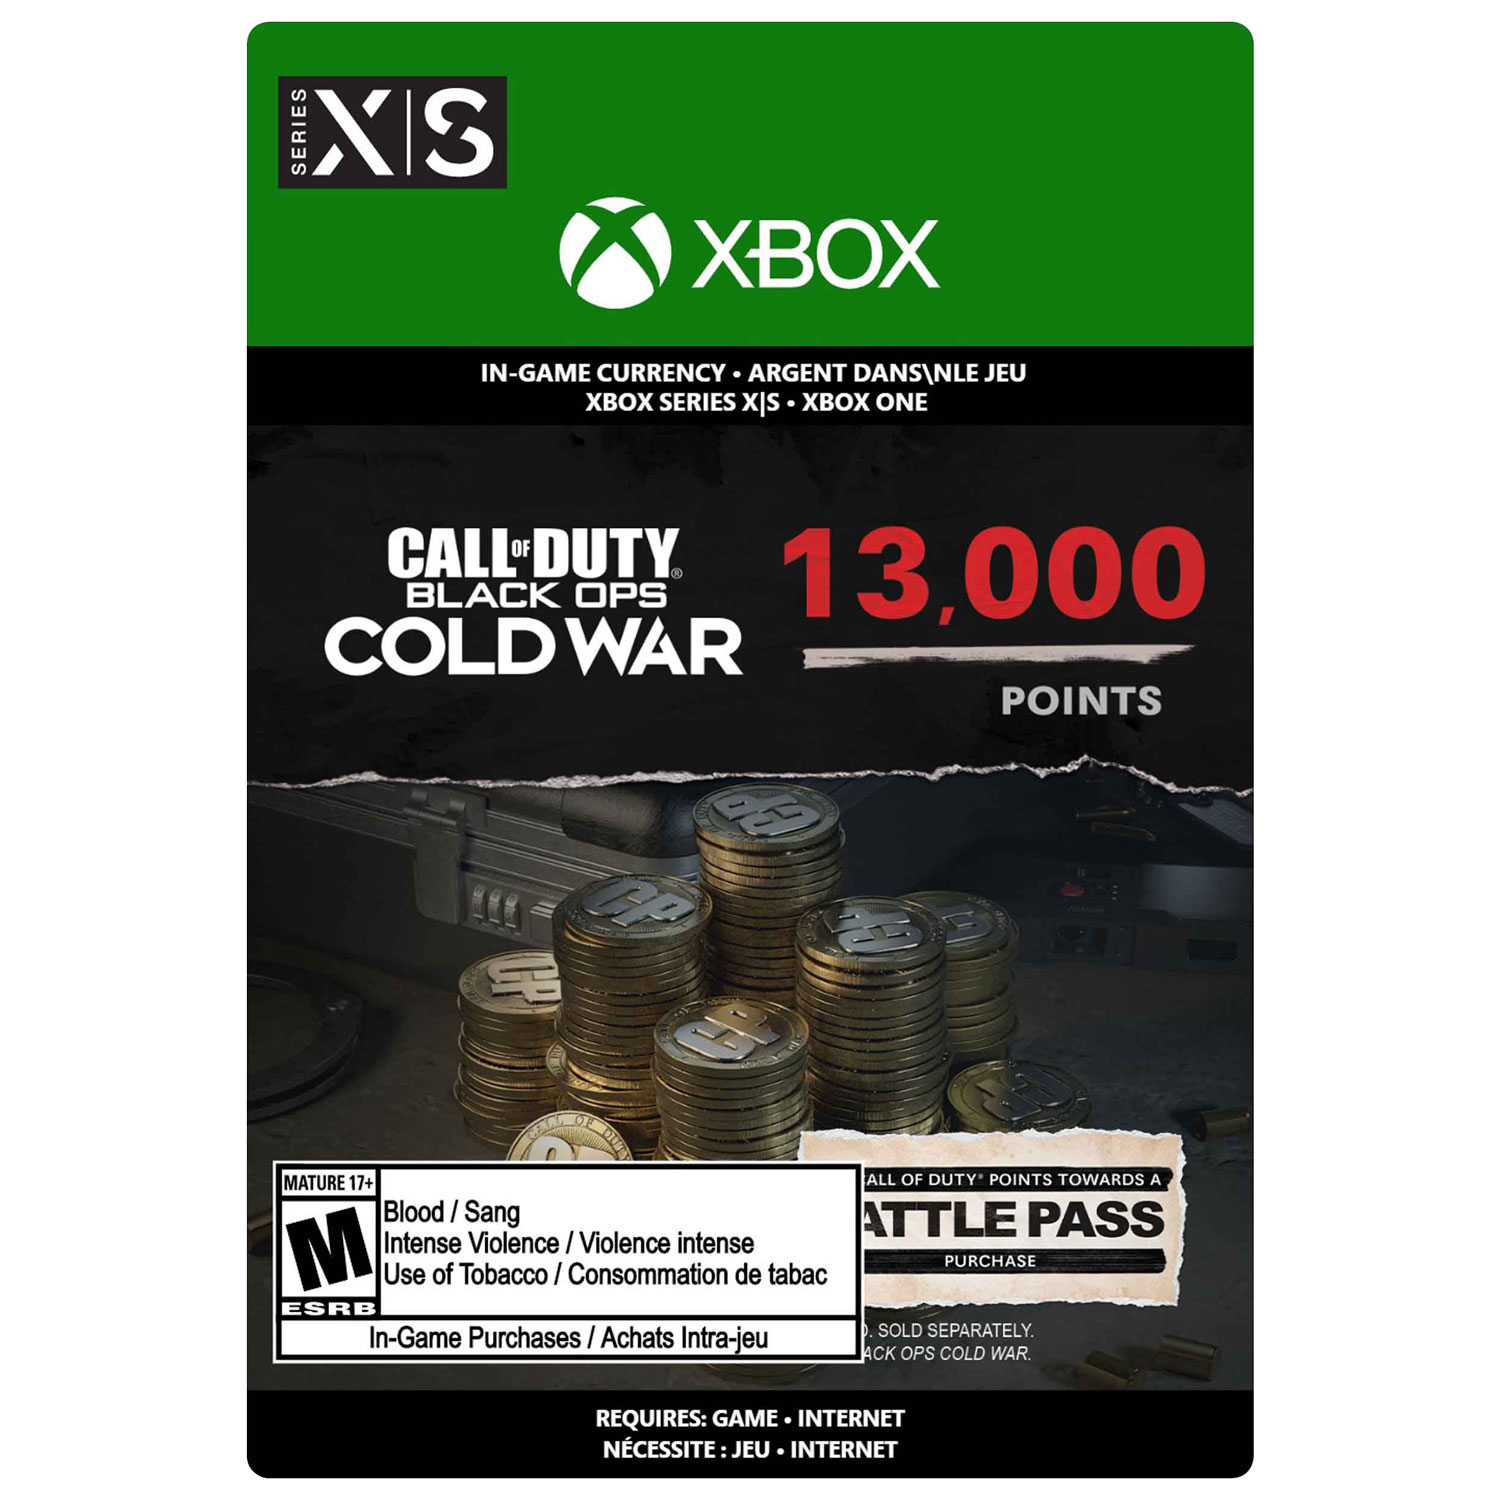 Call of Duty: Black Ops Cold War - 13000 COD Points (Xbox Series X|S / Xbox One) - Digital Download